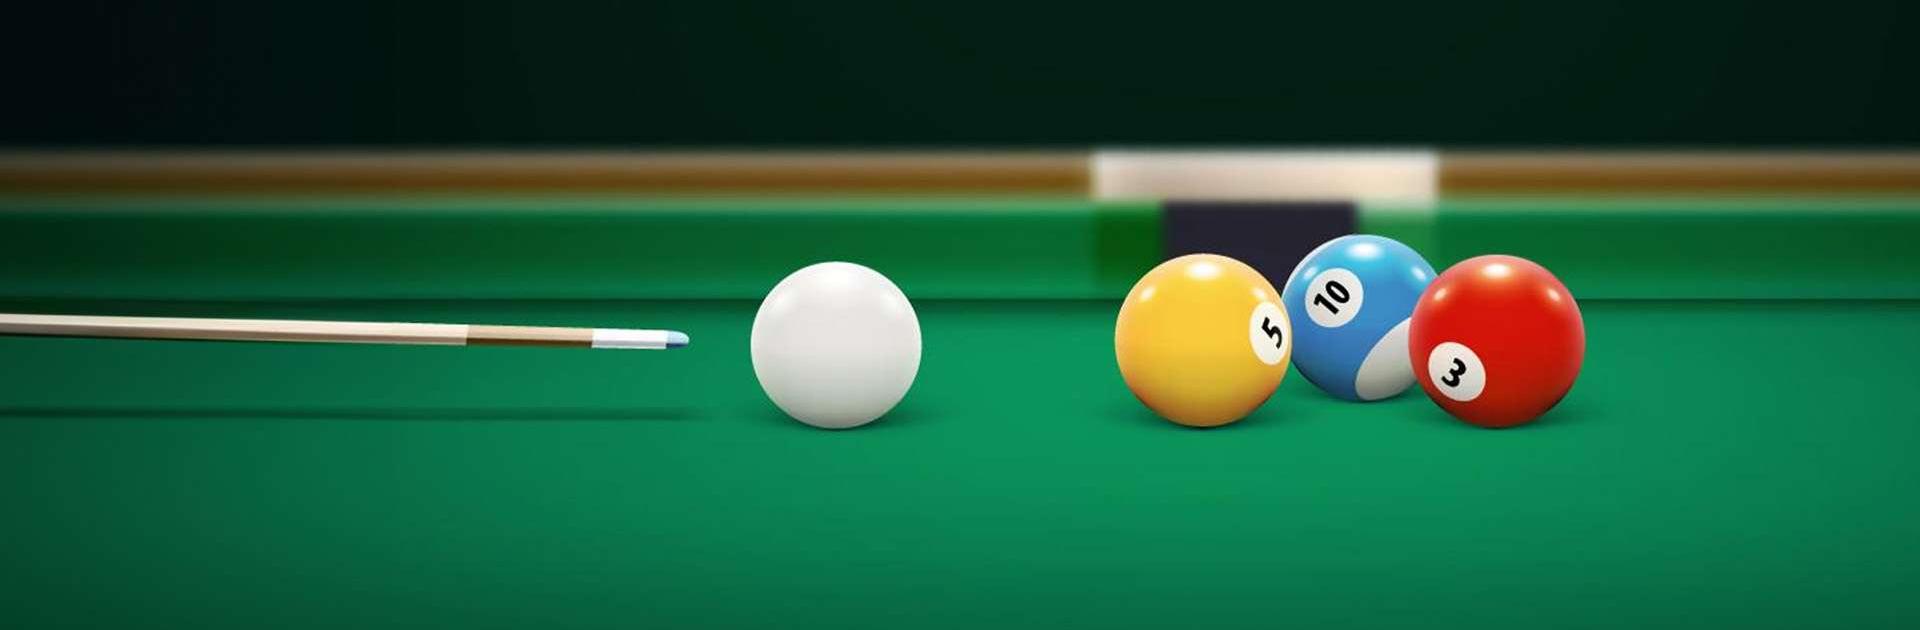 Play Classic 8 ball Pool Online